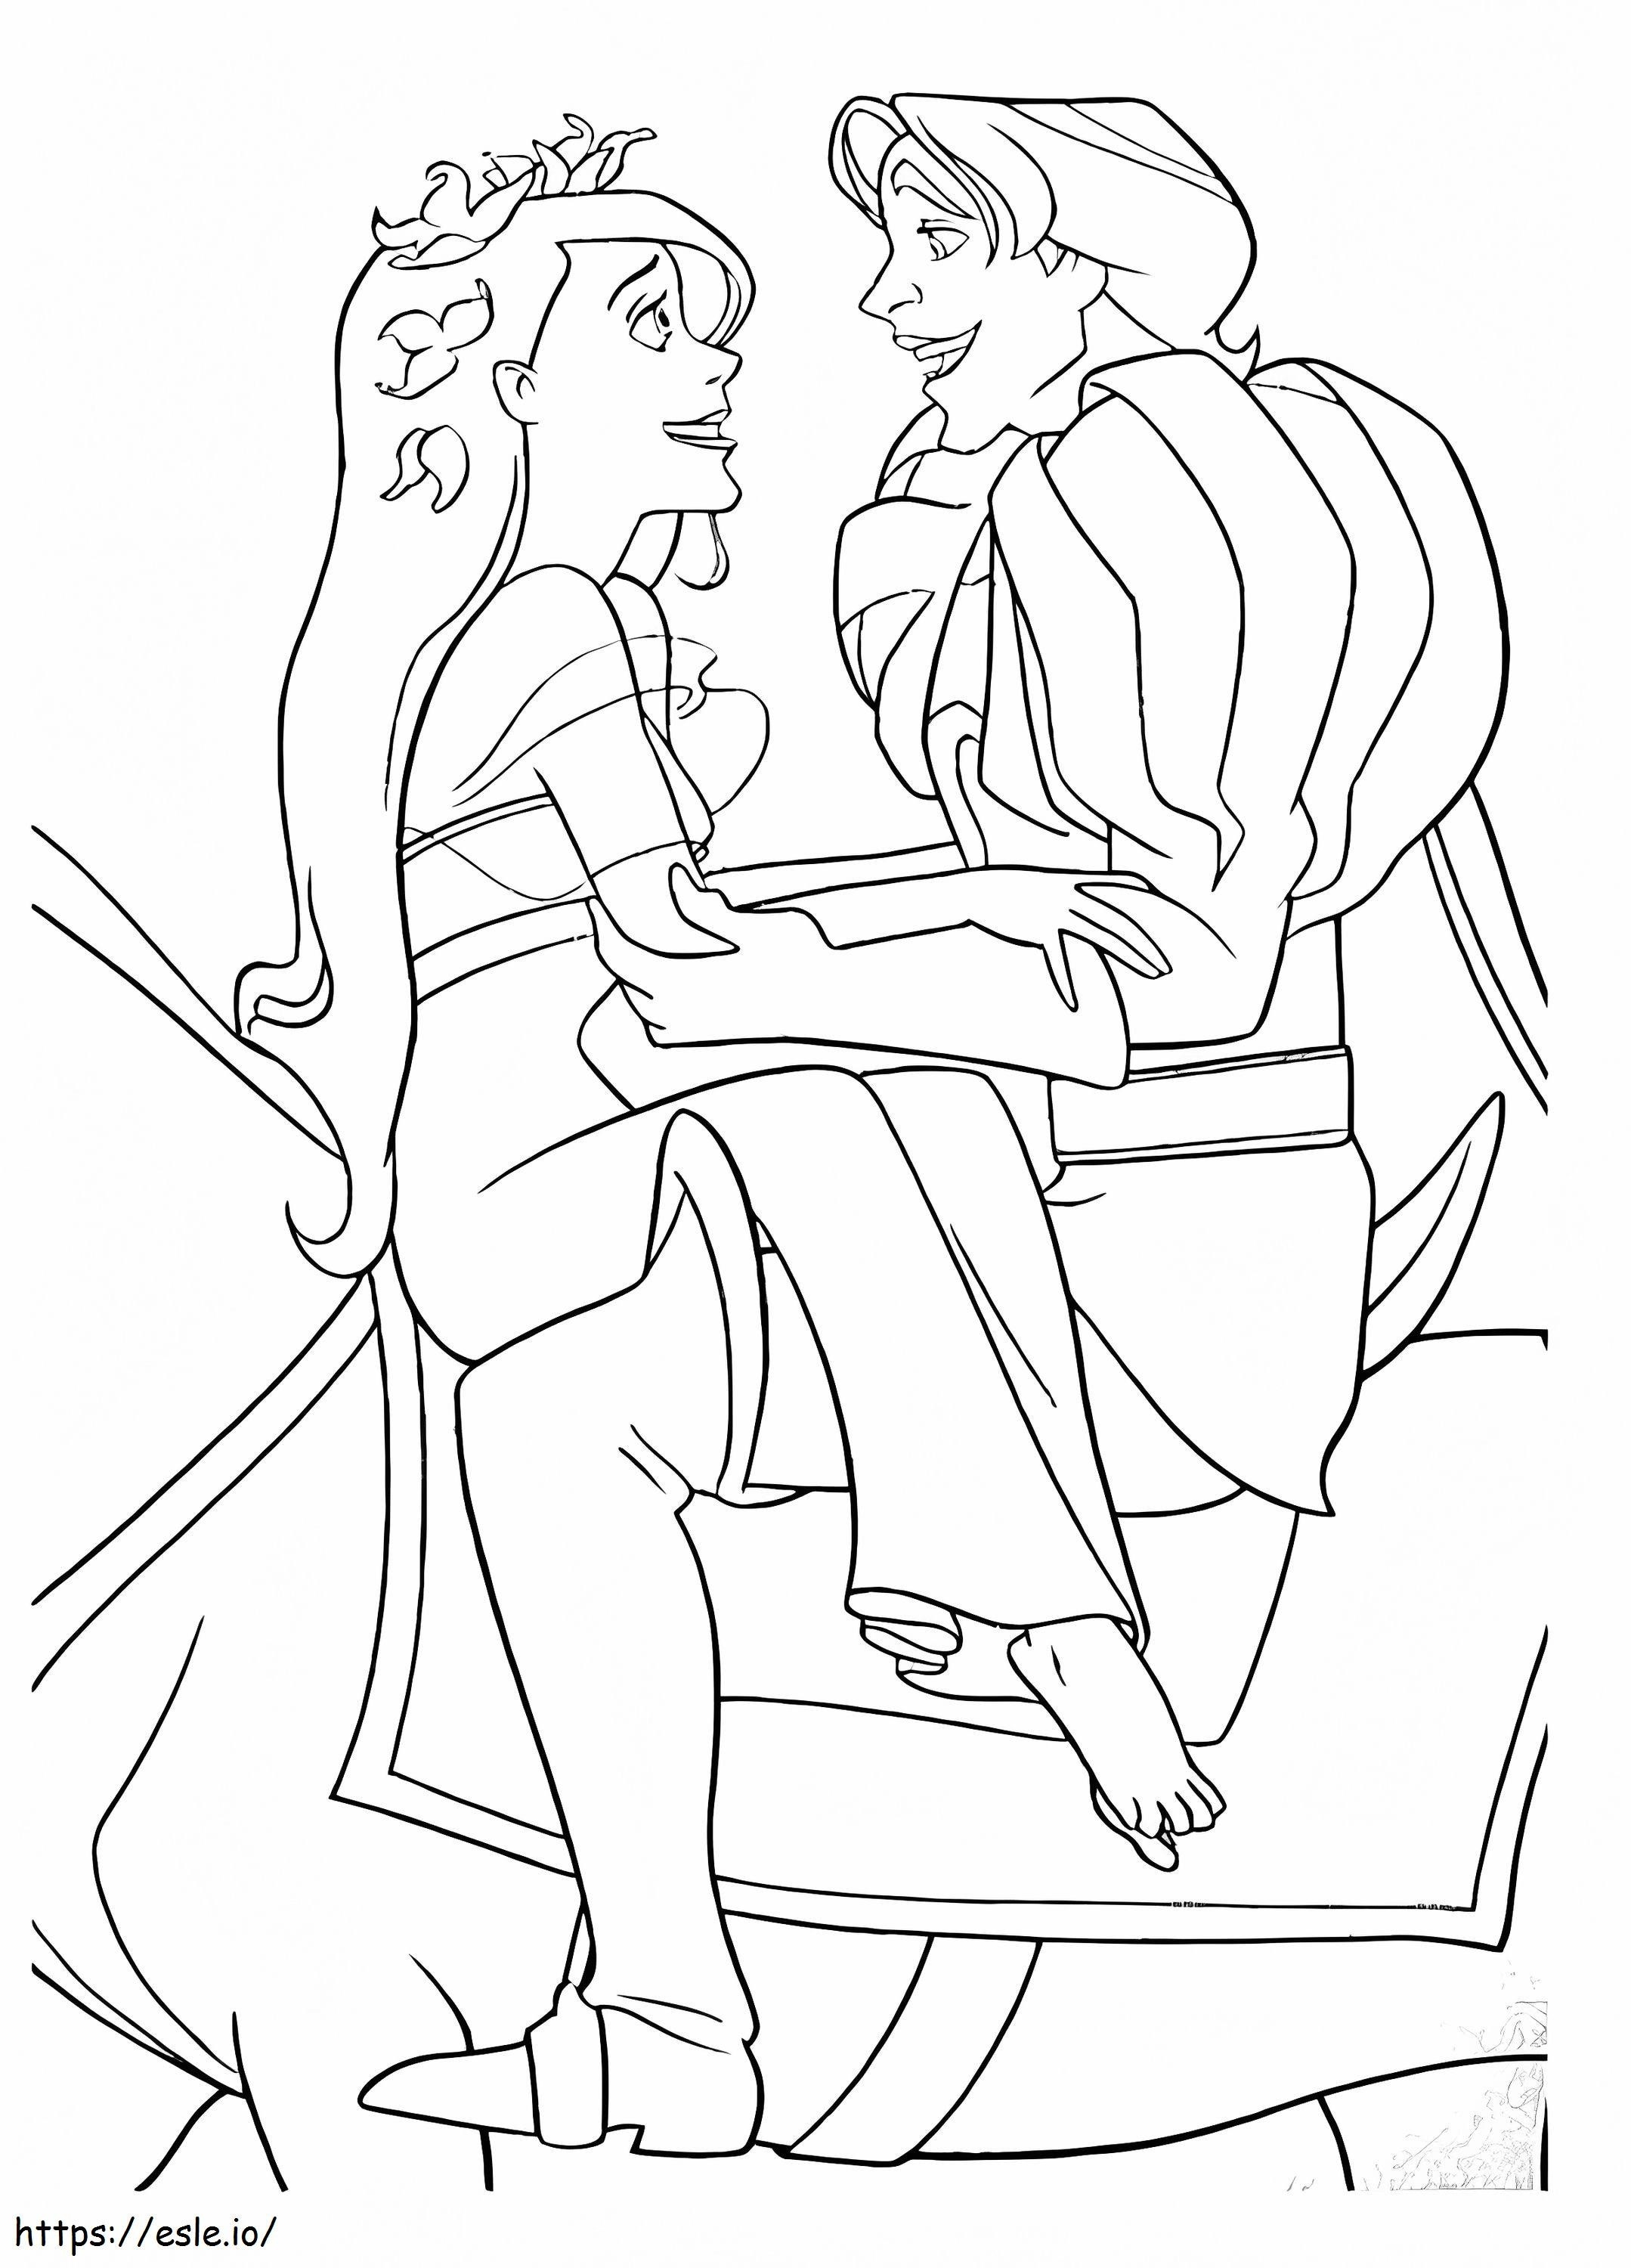 Giselle Riding A Horse With Prince Edward In Enchanted coloring page